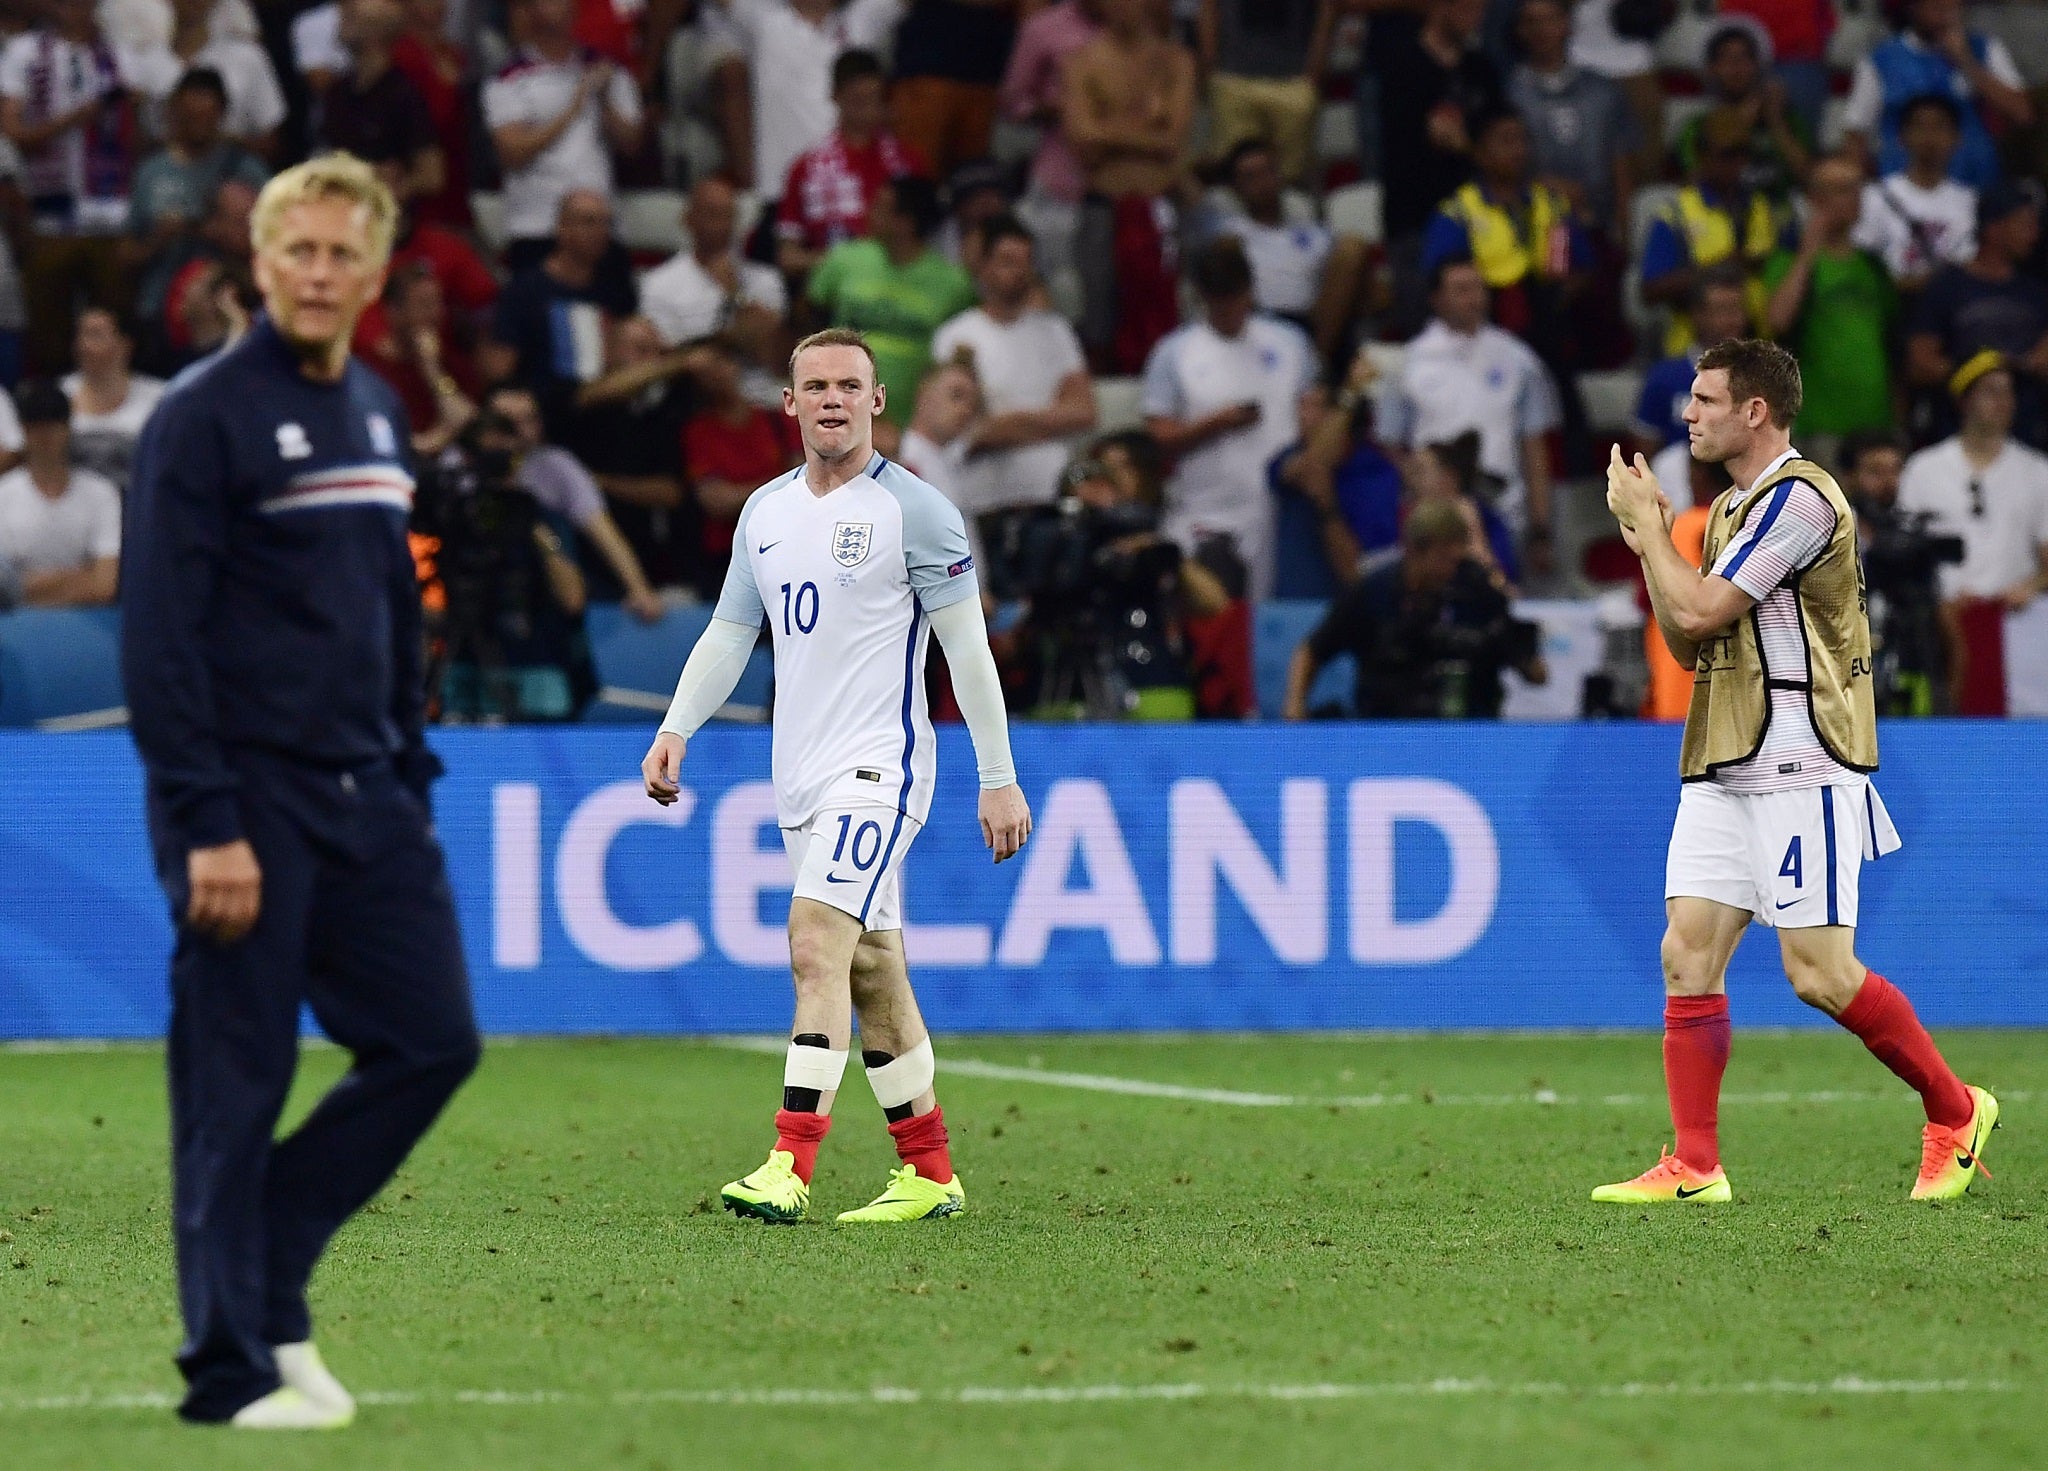 &#13;
England went out of the Euros in the round of 16 &#13;